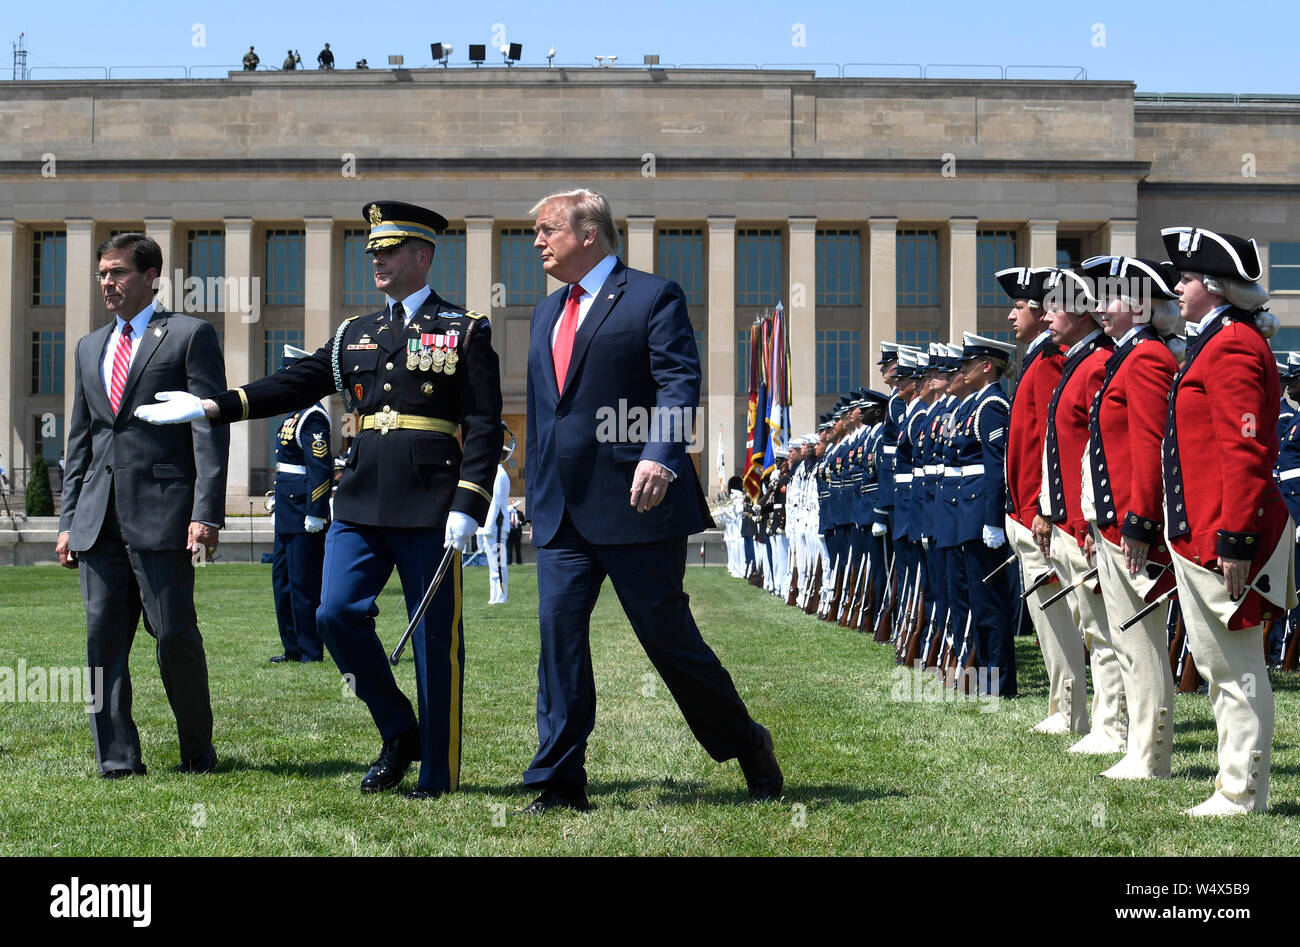 United States President Donald J. Trump (L) concludes a review of troops with the new US Secretary of Defense Dr. Mark T. Esper (R) and US Air Force General Paul J. Selva, Vice Chairman of the Joint Chiefs of Staff, at the Pentagon, Thursday, July 25, 2019, Washington, DC. The Department of Defense has been without a full-time leader since former Secretary Jim Mattis resigned in December 2018. Credit: Mike Theiler/Pool via CNP /MediaPunch Stock Photo